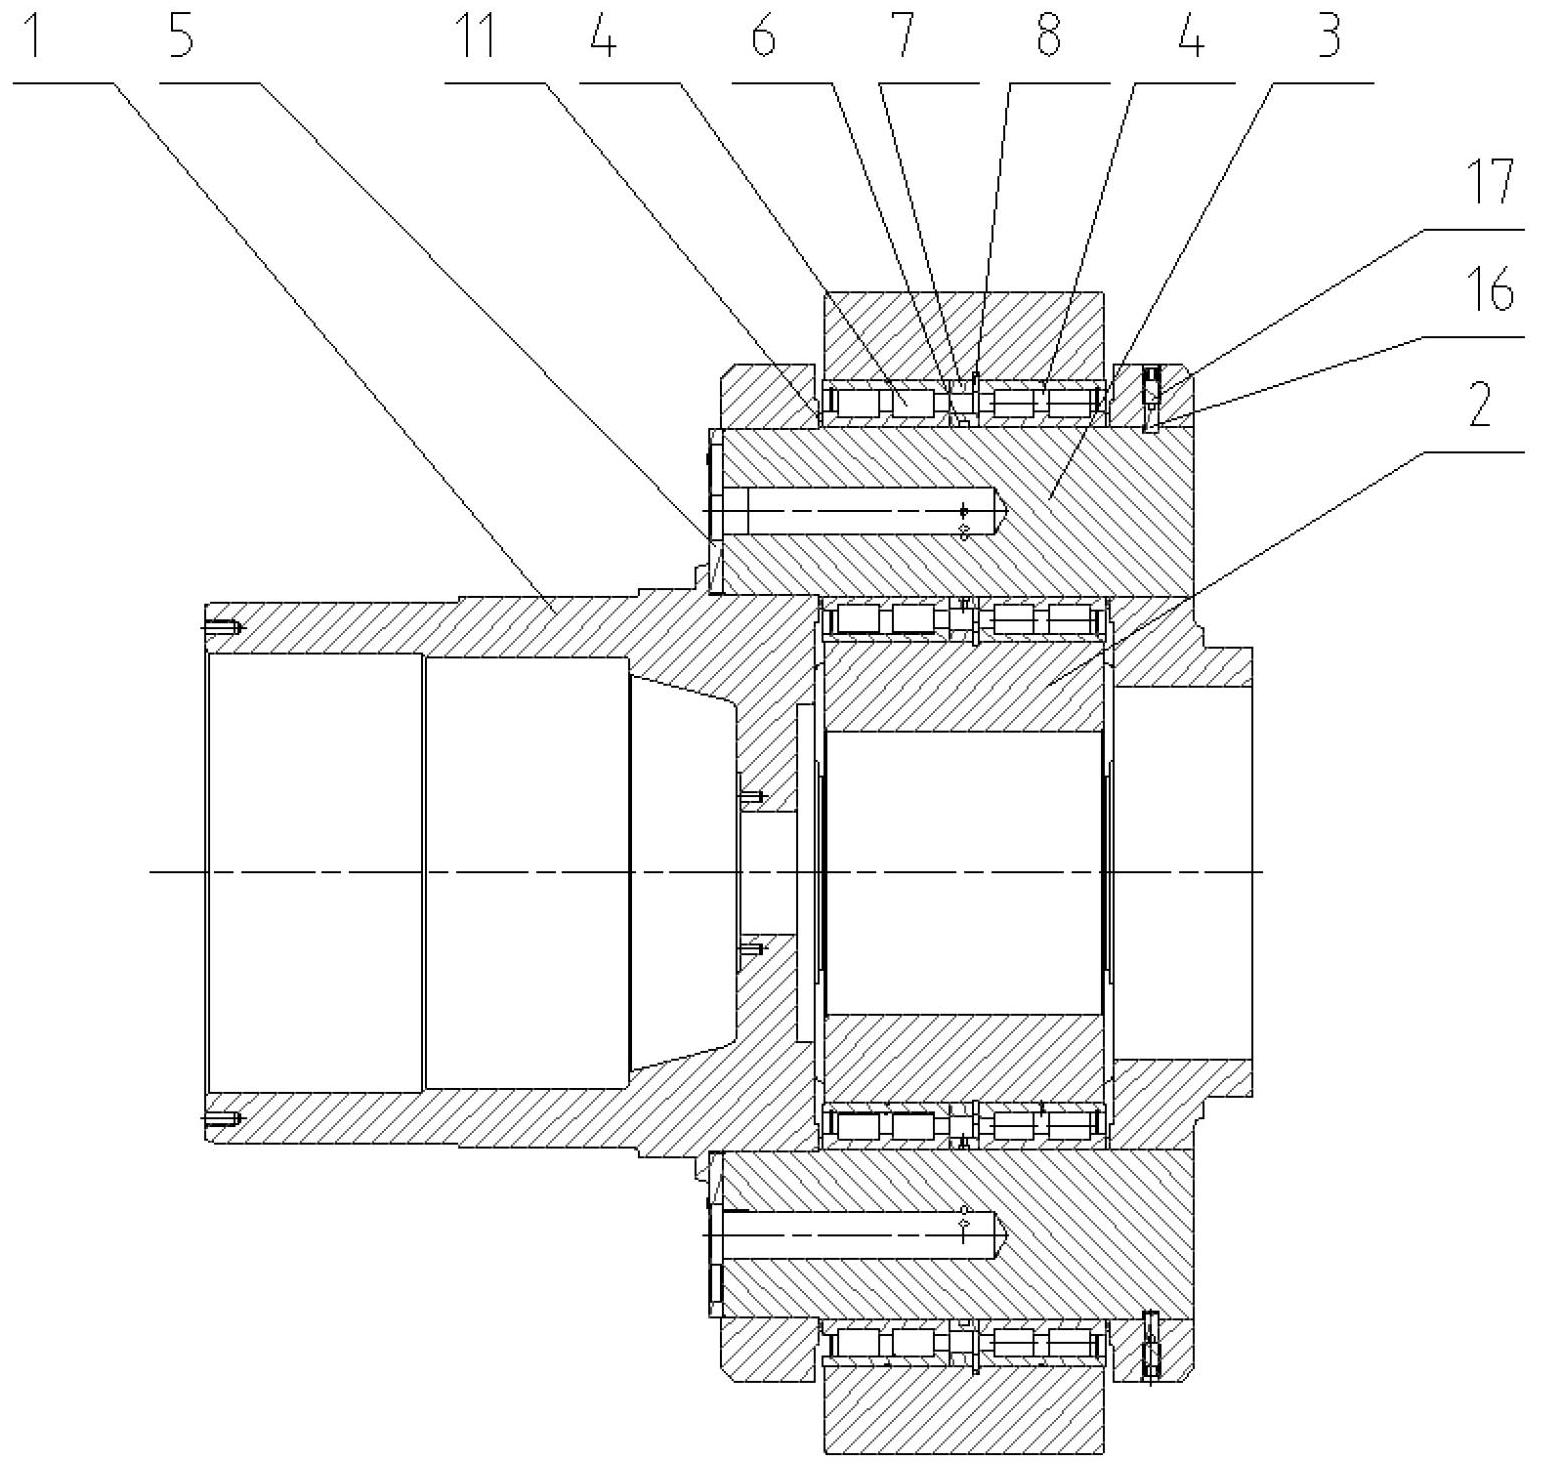 Planet bearing lubricating device in gear box